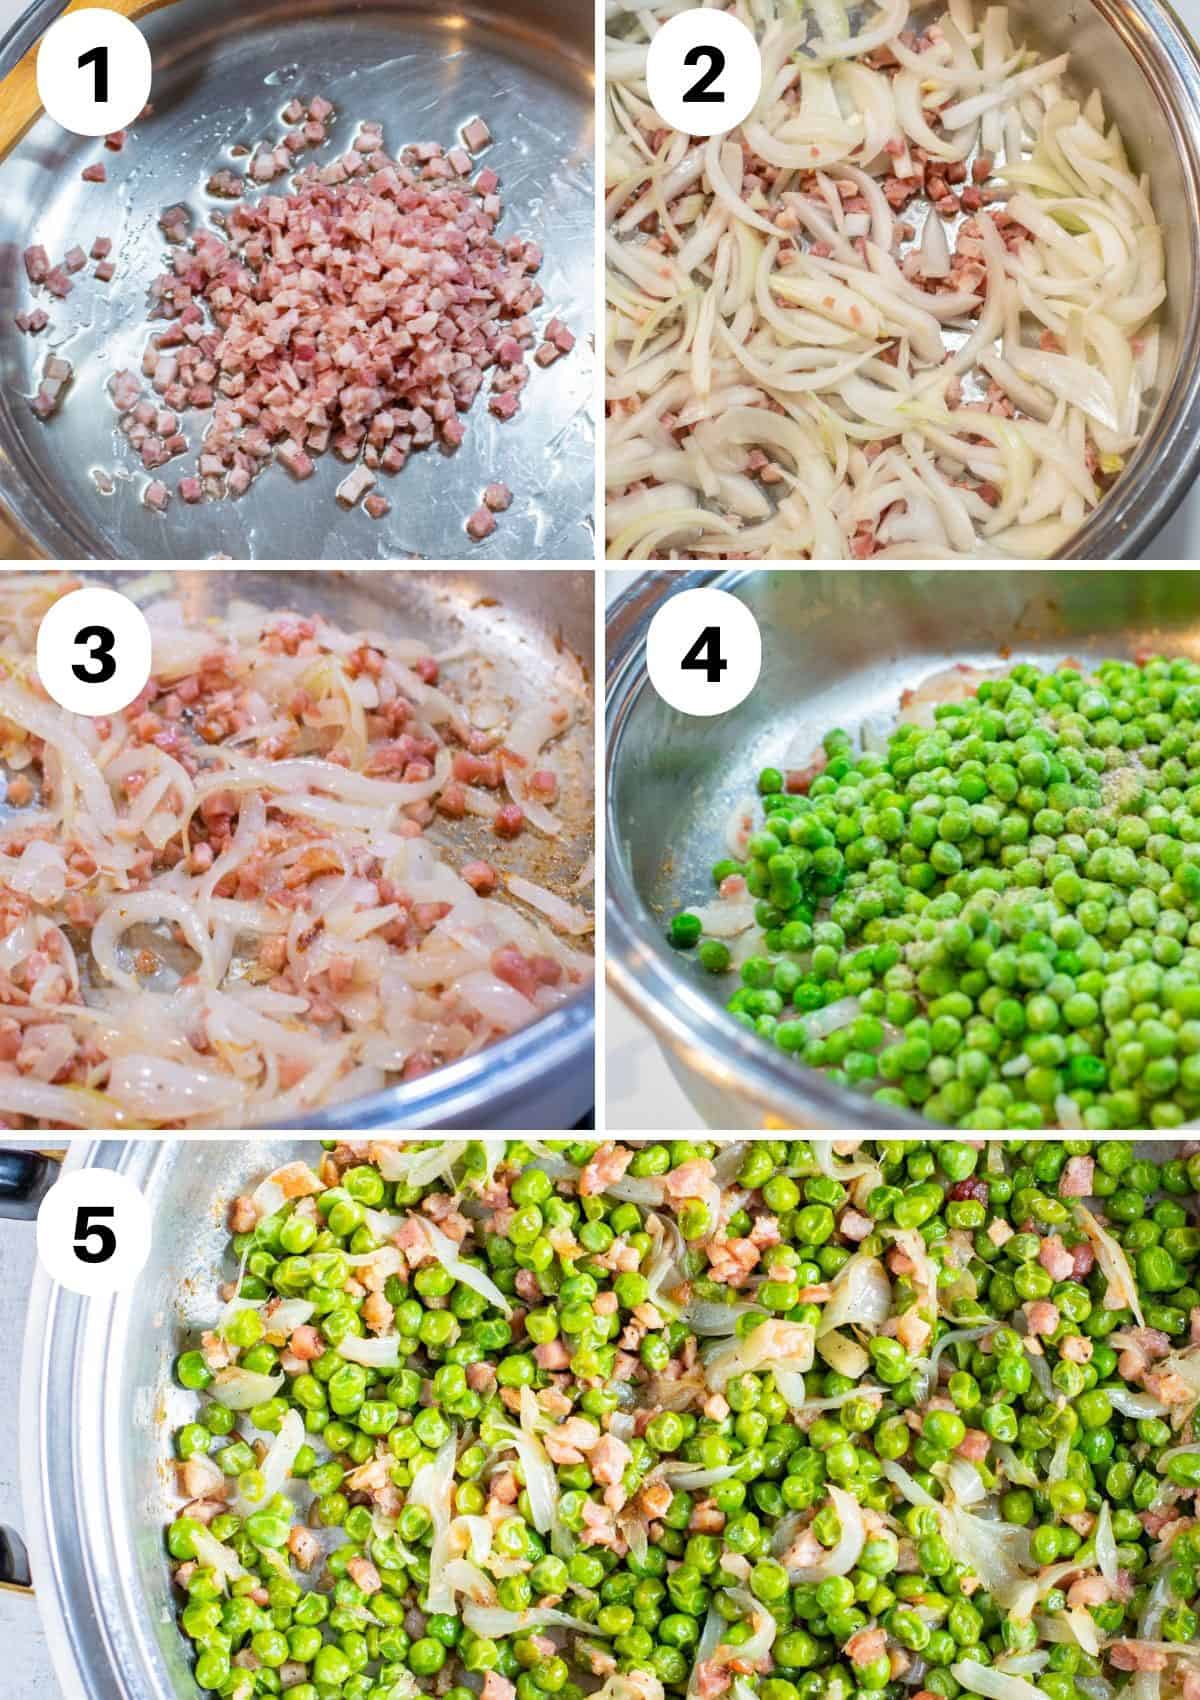 cooking pancetta, onions and peas in pan